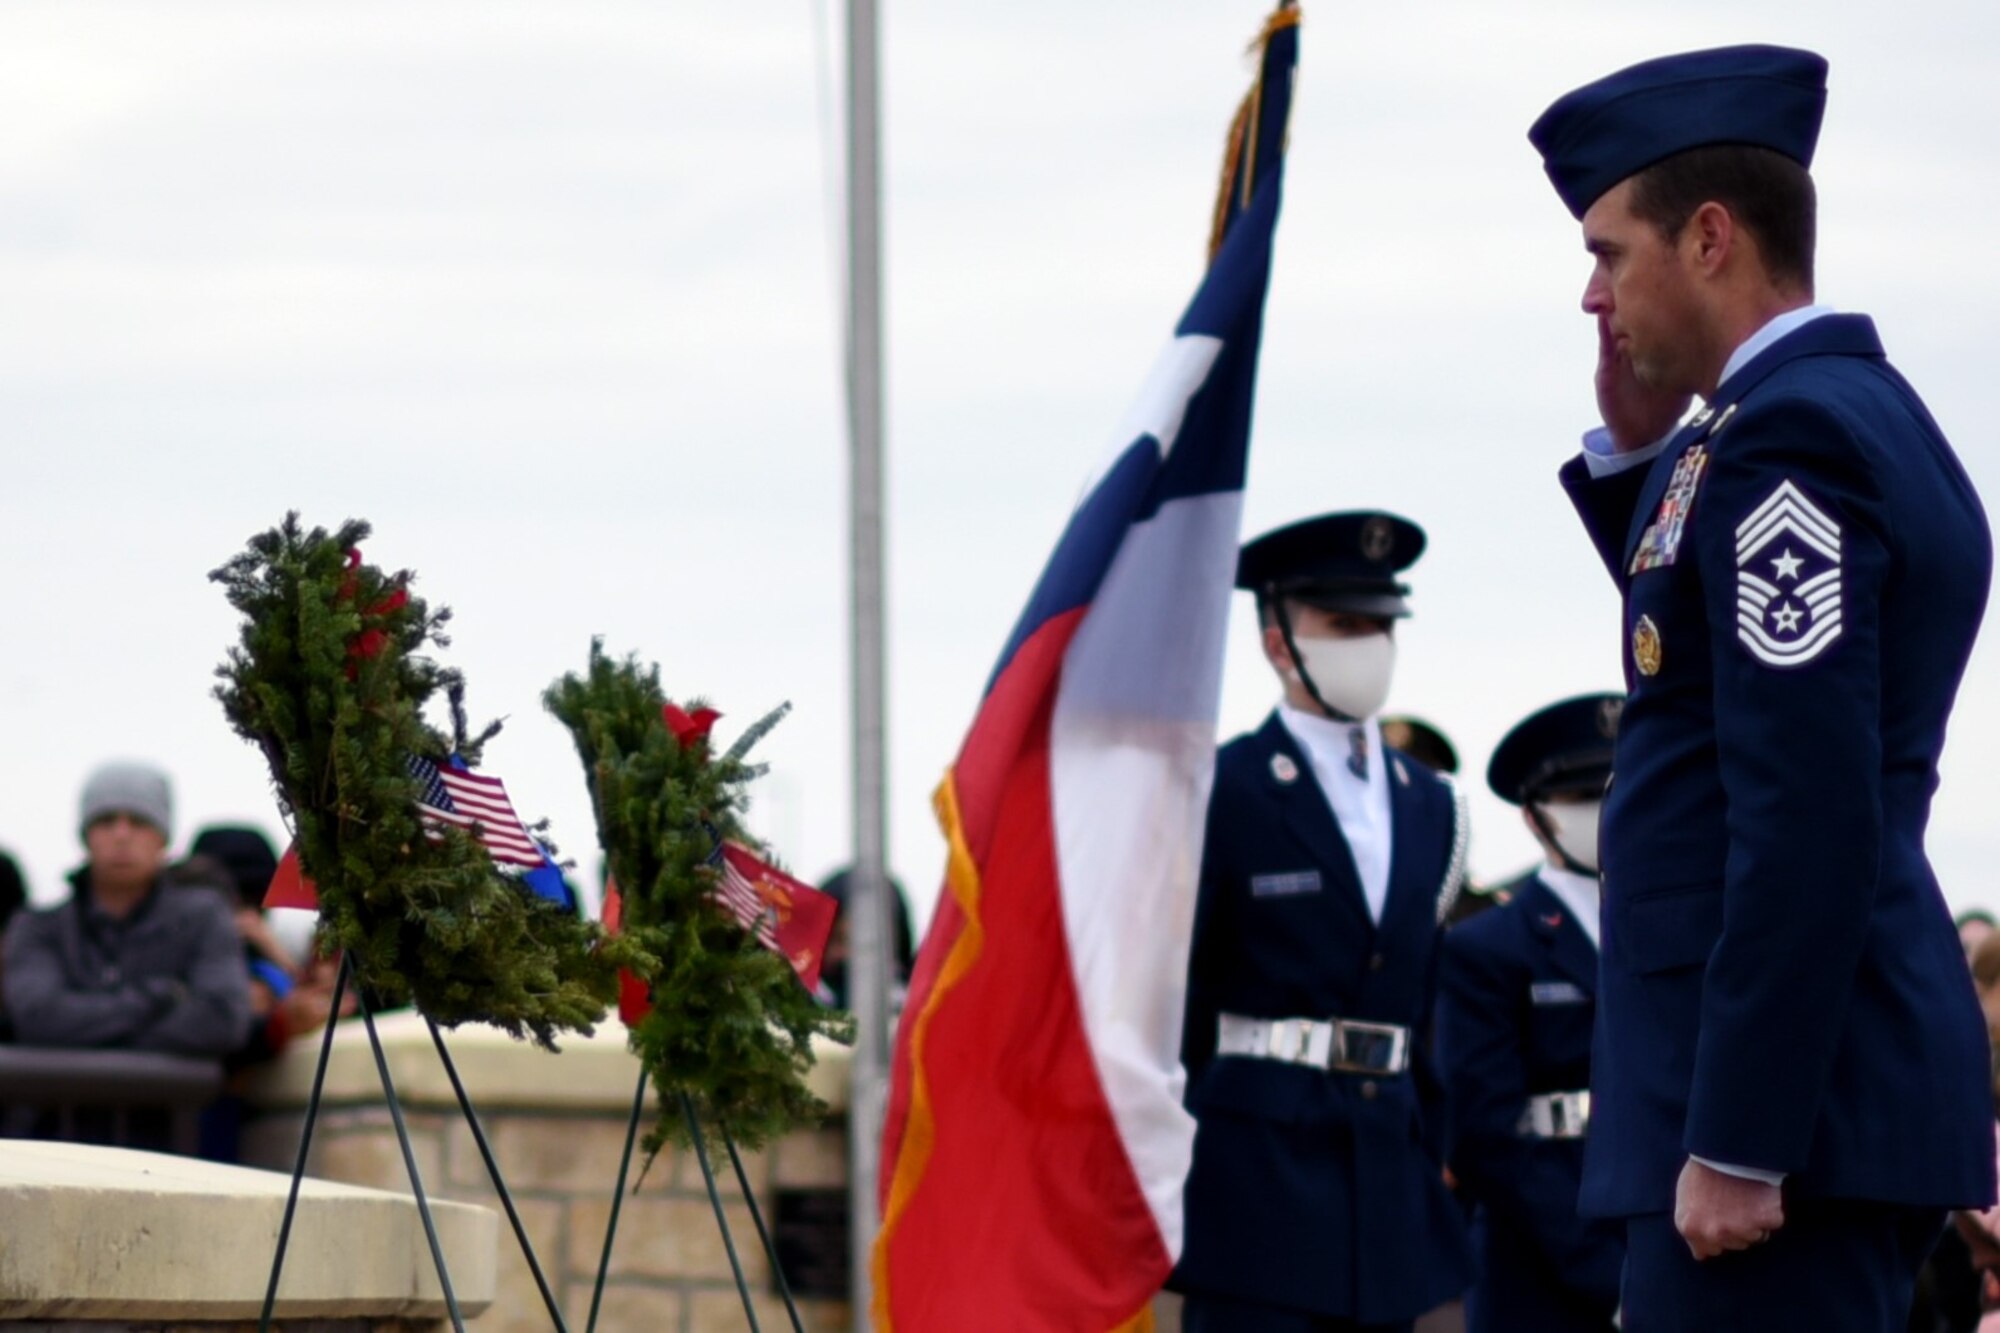 301st Fighter Wing Command Chief Master Sgt. Michael Senigo salutes the Air Force wreath during a Wreaths Across America event at the Dallas-Fort Worth National Cemetery on Dec. 18, 2021. Senigo and representatives from each branch laid their respective wreaths to honor their service men and women. (U.S. Air Force photo by Staff Sgt. Randall Moose)